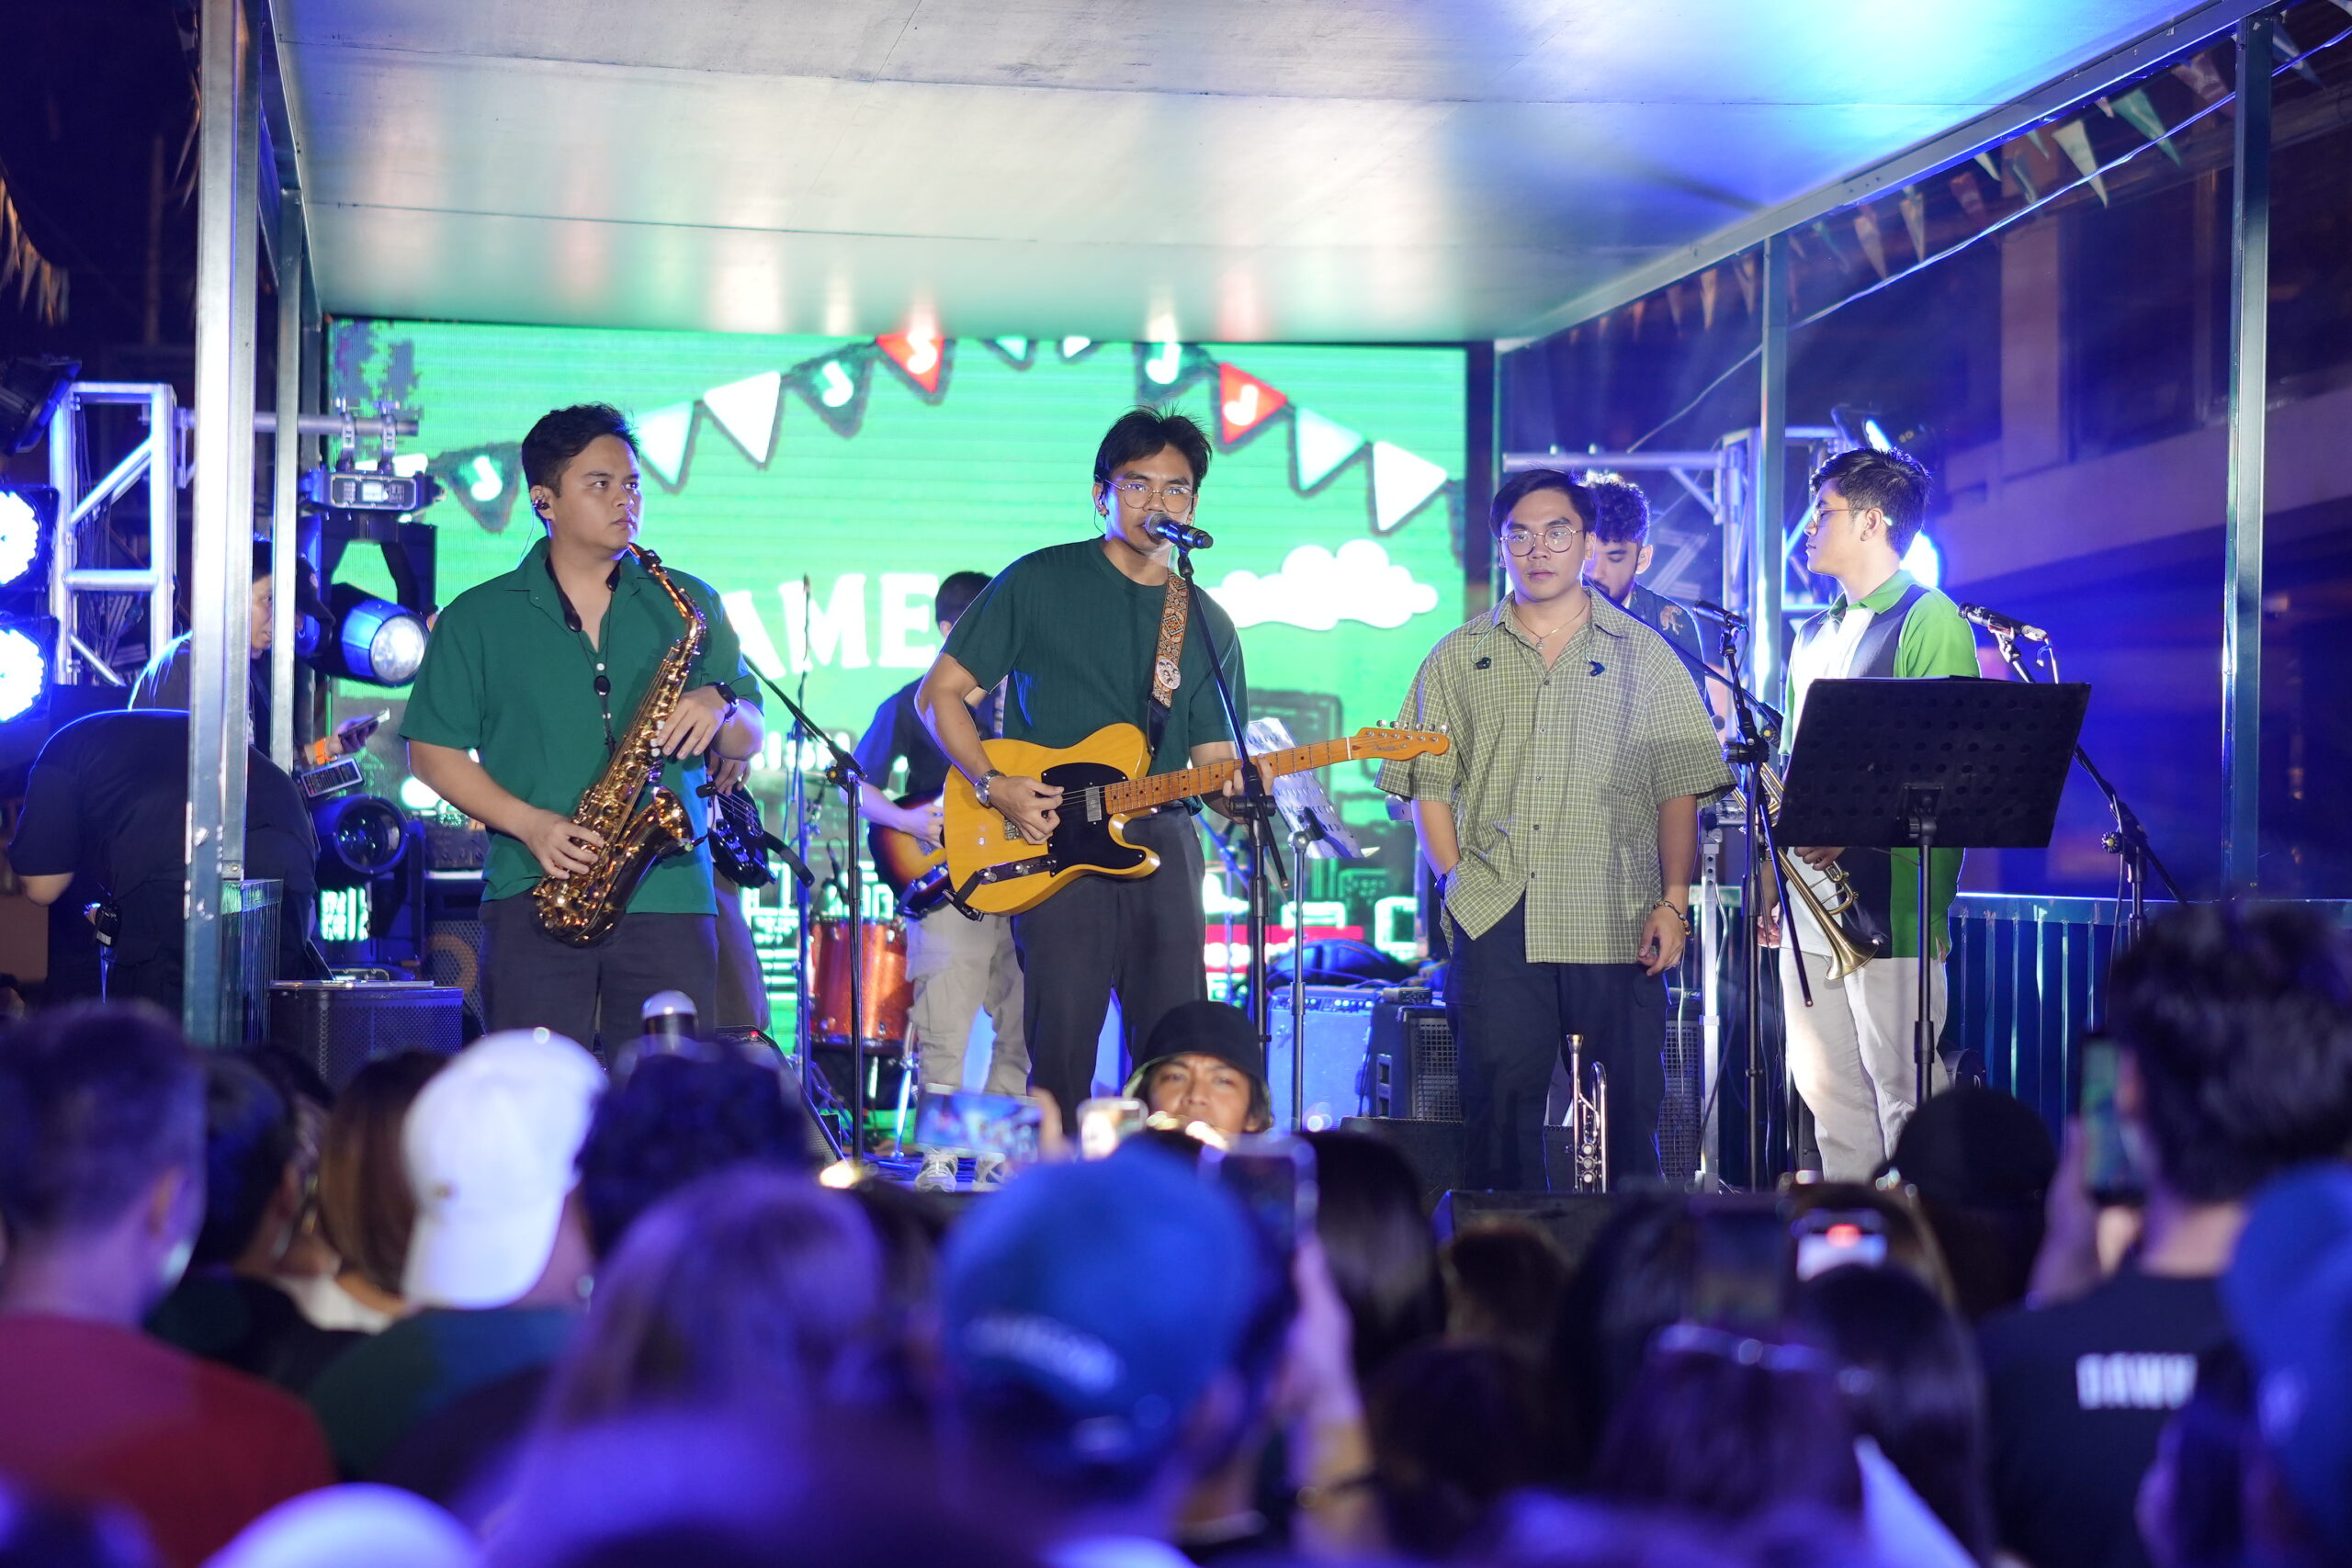 Jameson Irish Whisky | Games, Drinks, and Exciting Acts: What Went Down at Jameson’s St. Patrick’s Day Street Party at Poblacion